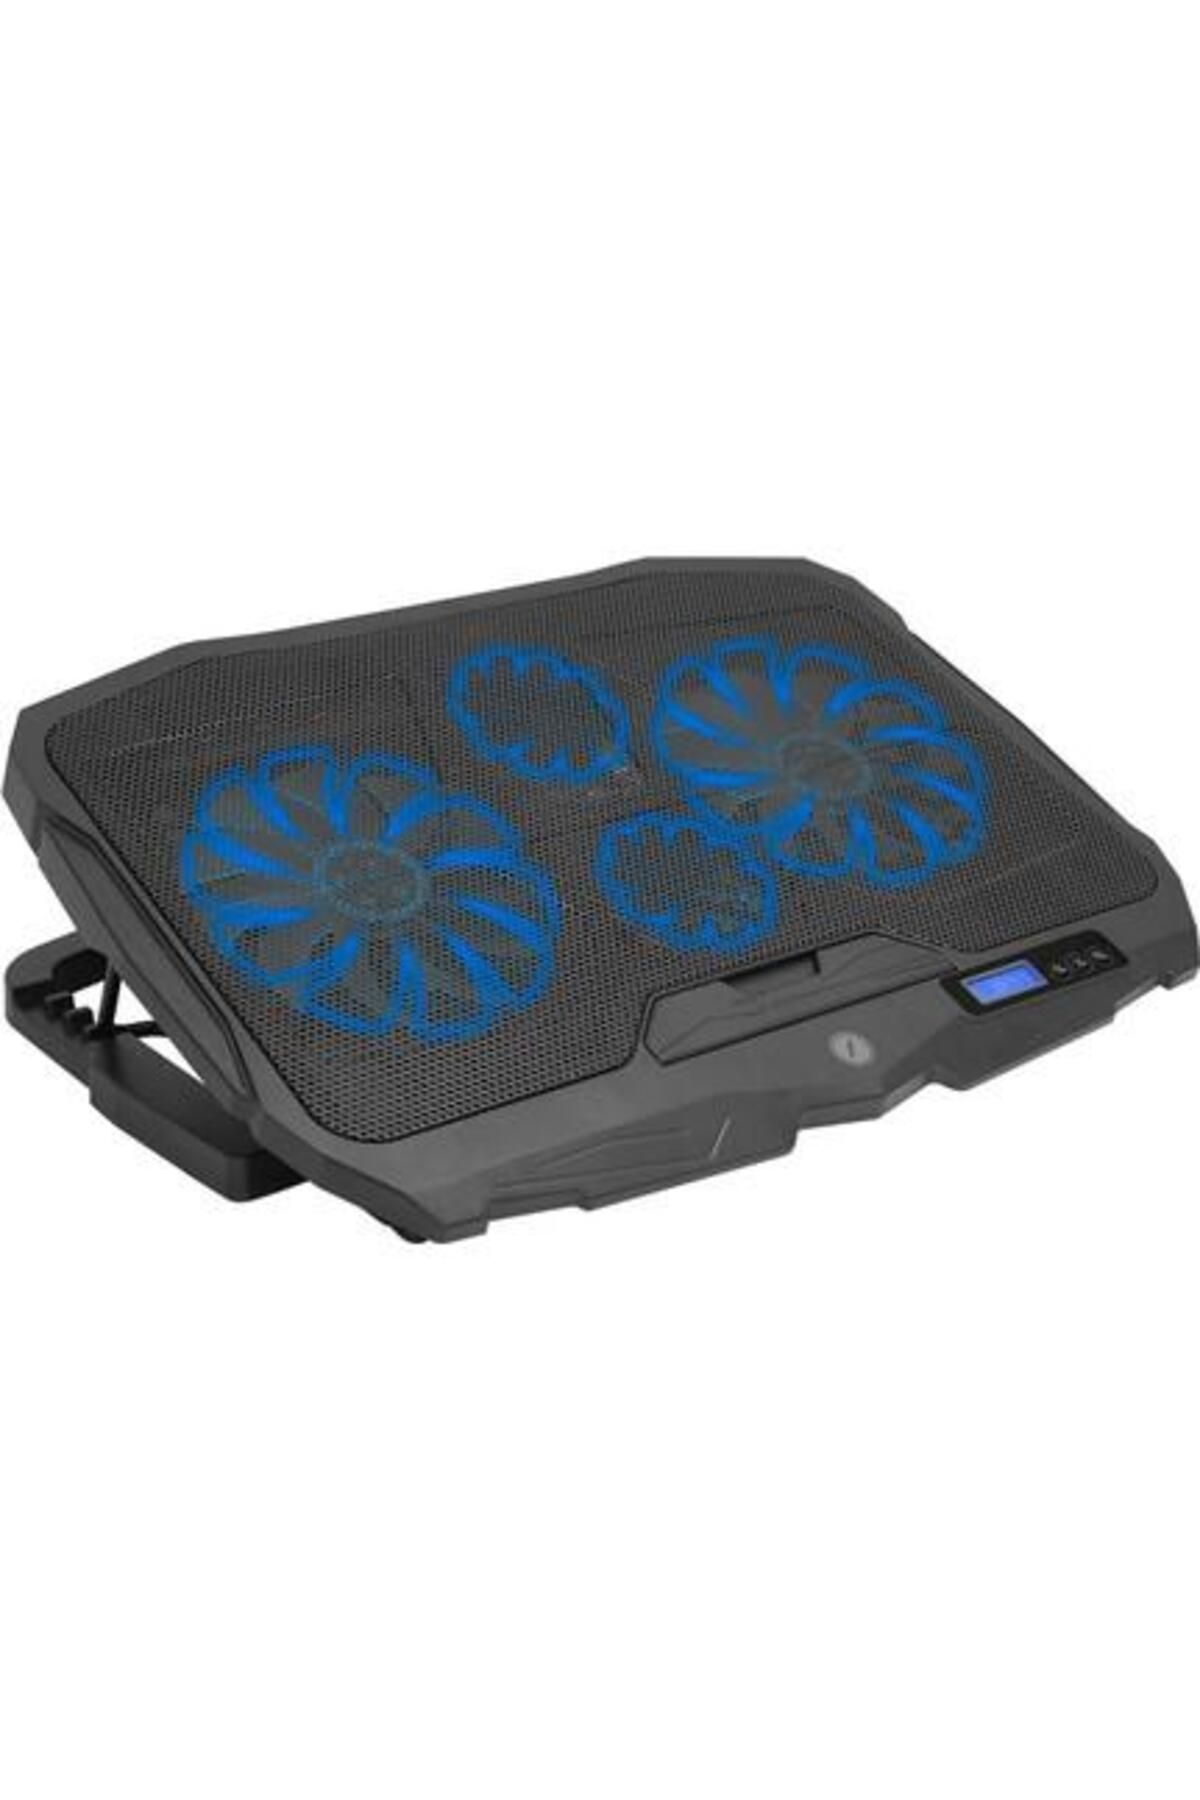 Frisby Fnc-5230st Gaming Notebook Soğutucu Stand